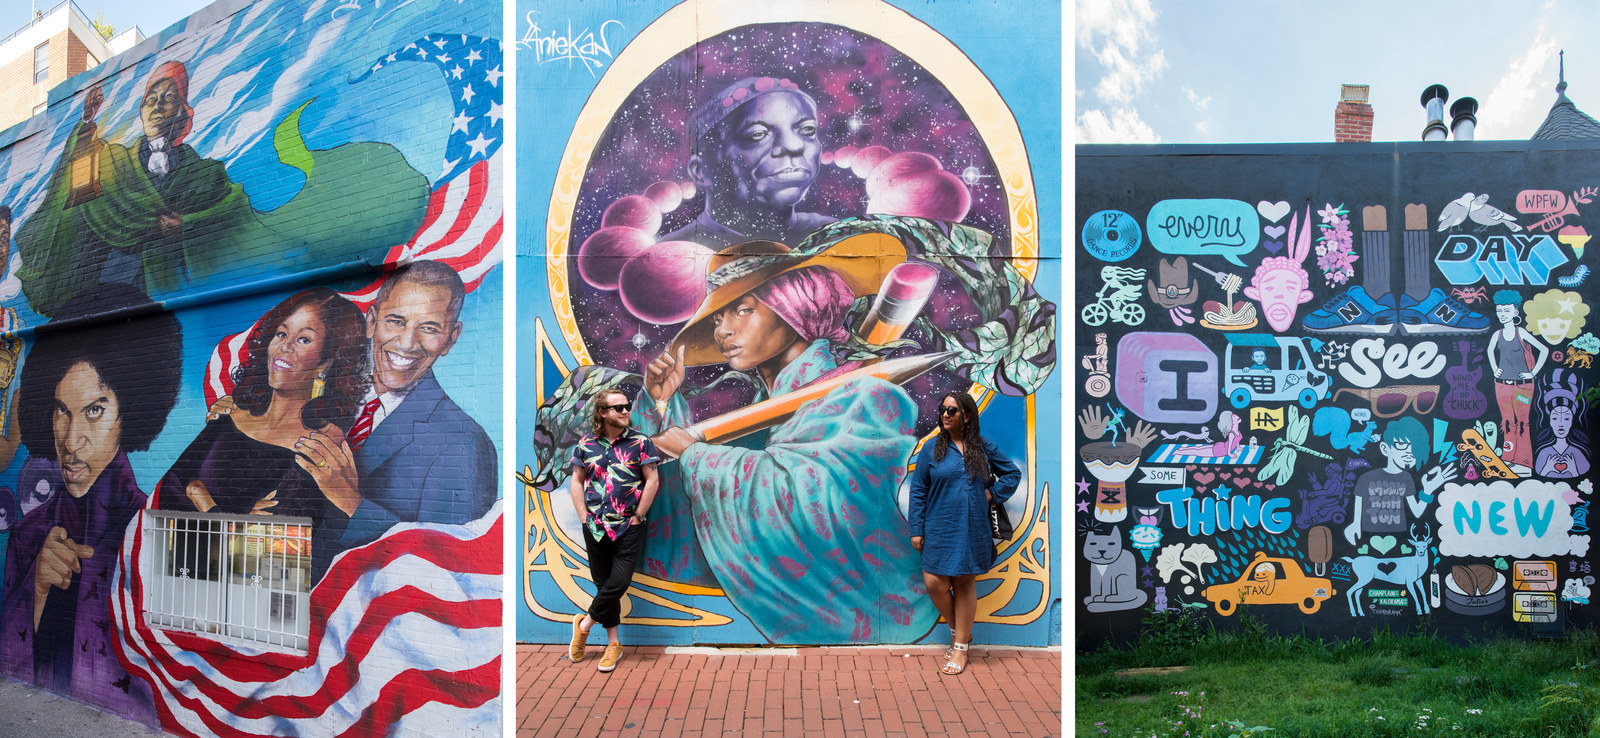 Here Are All The Cool Things We Discovered During Our Weekend In DC